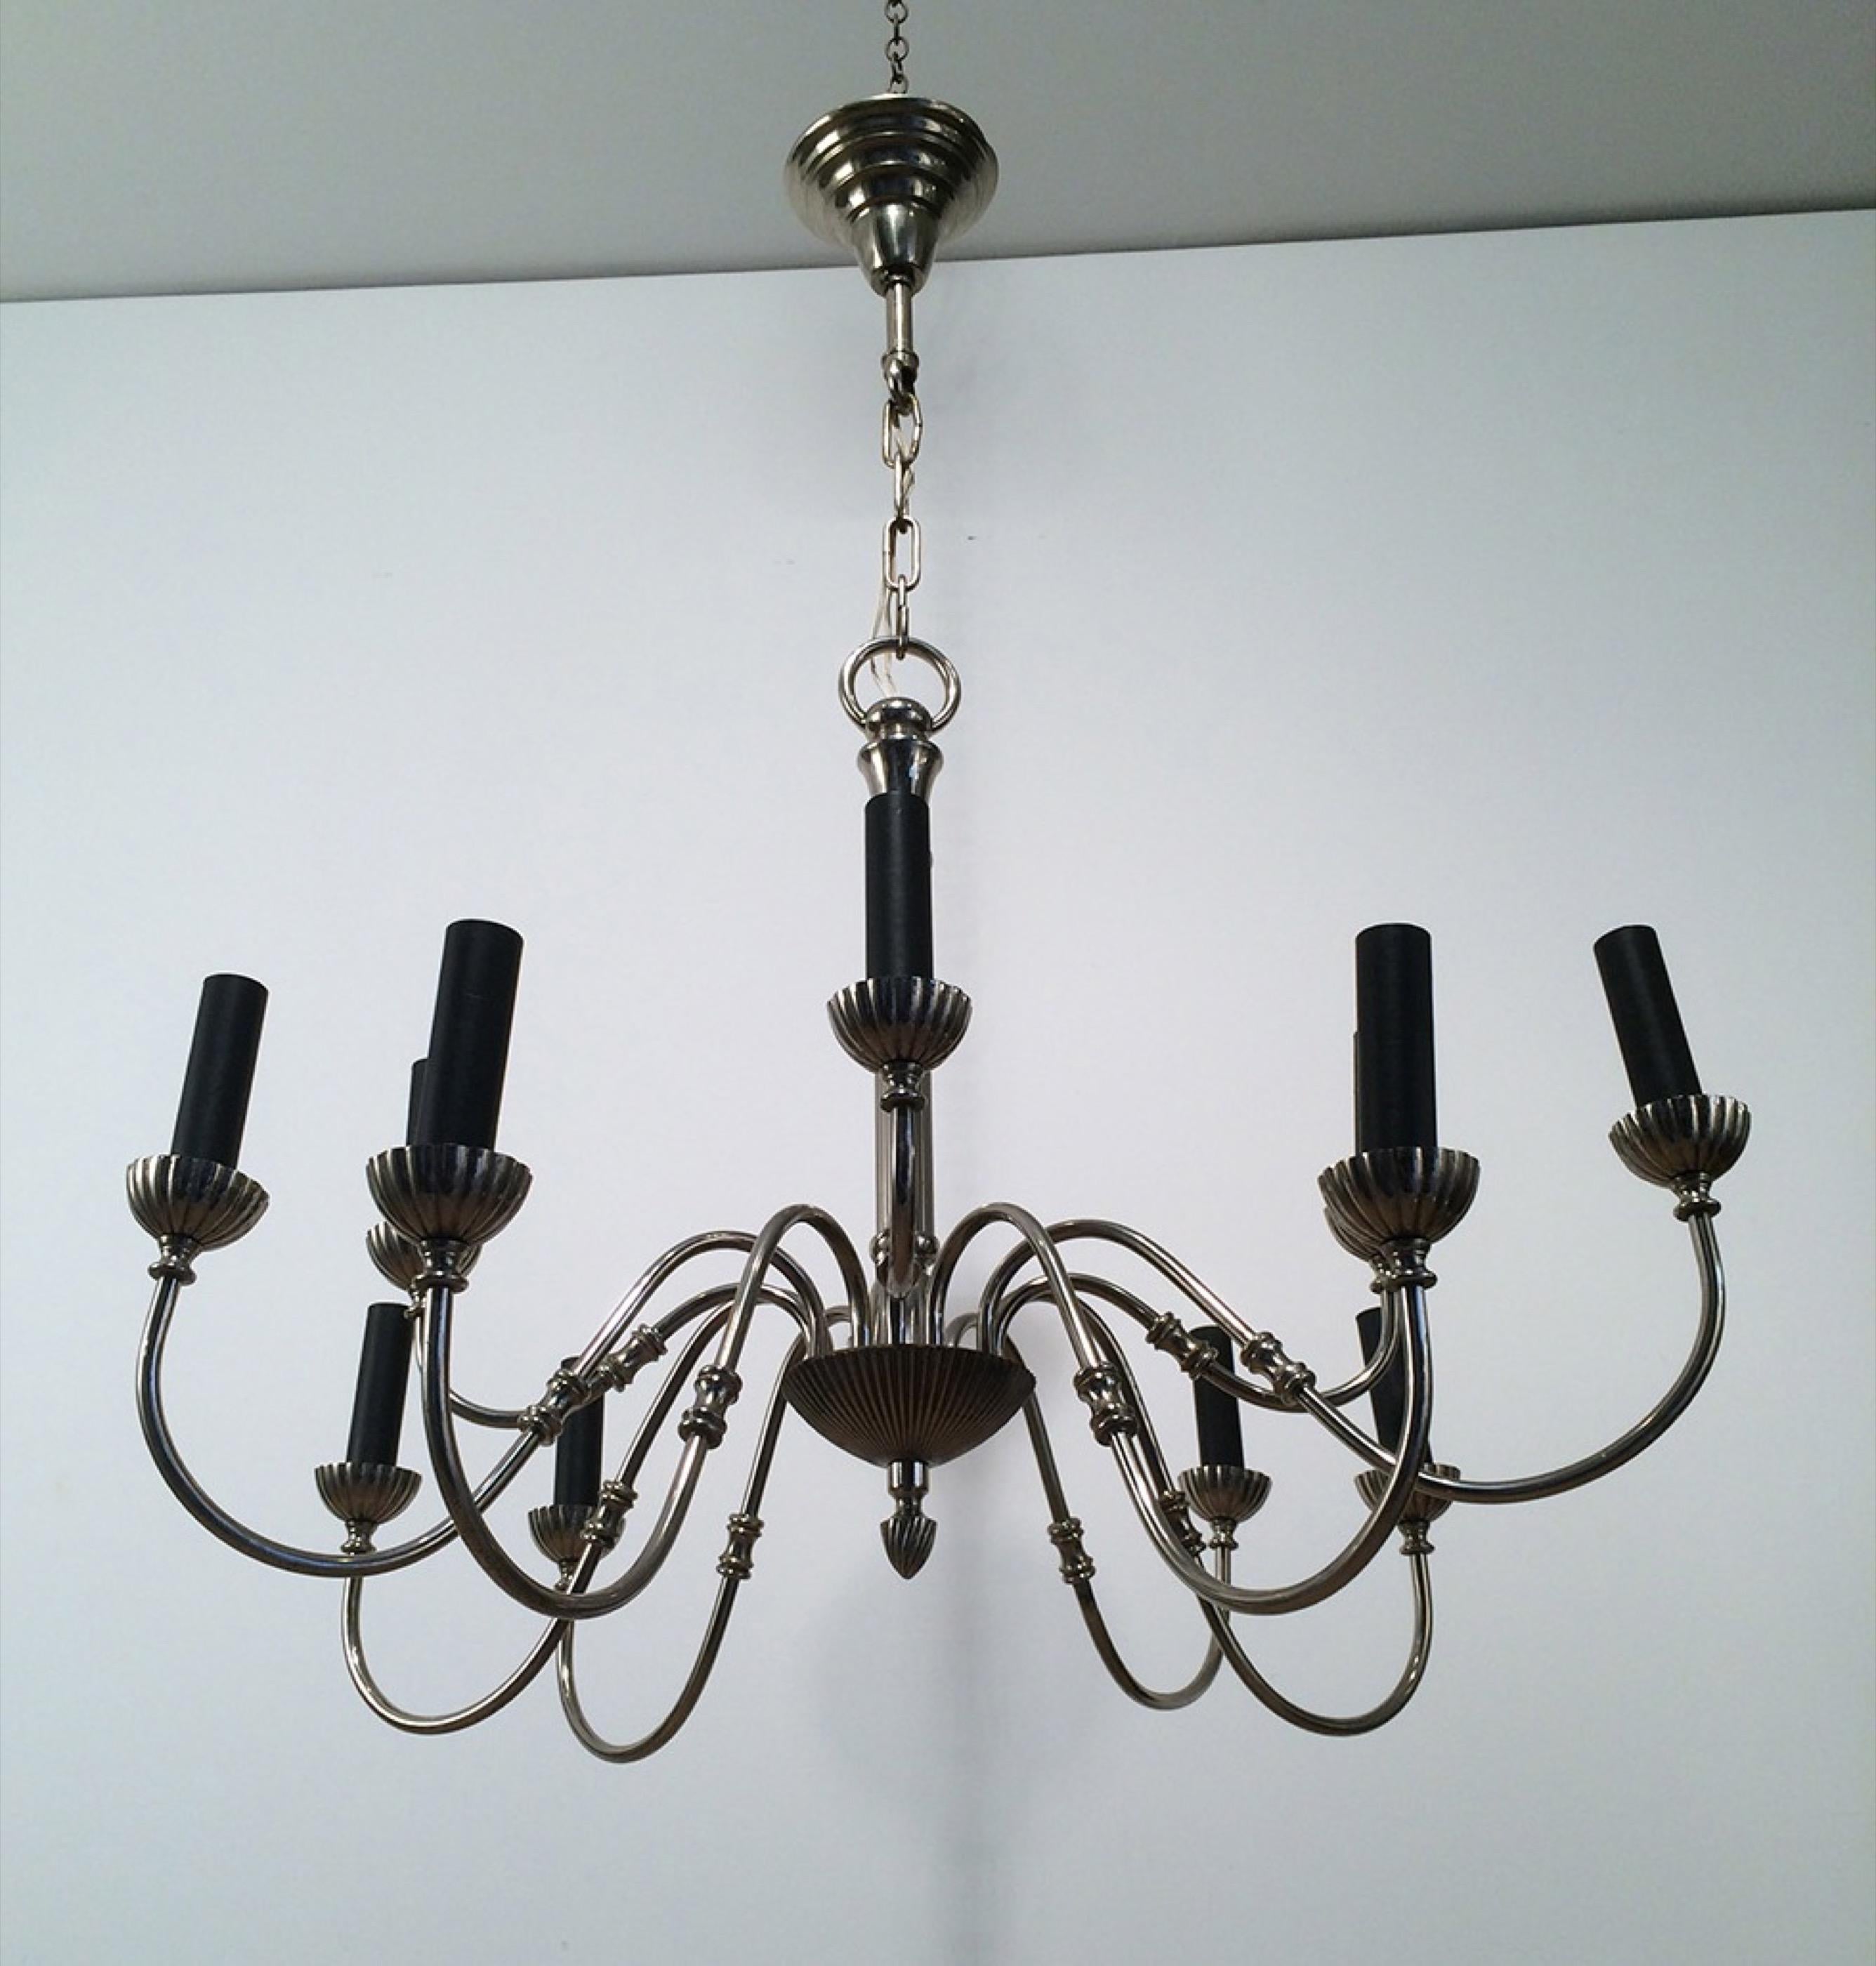 Silver Plated 12-Light Neoclassical Chandelier, circa 1940 For Sale 4